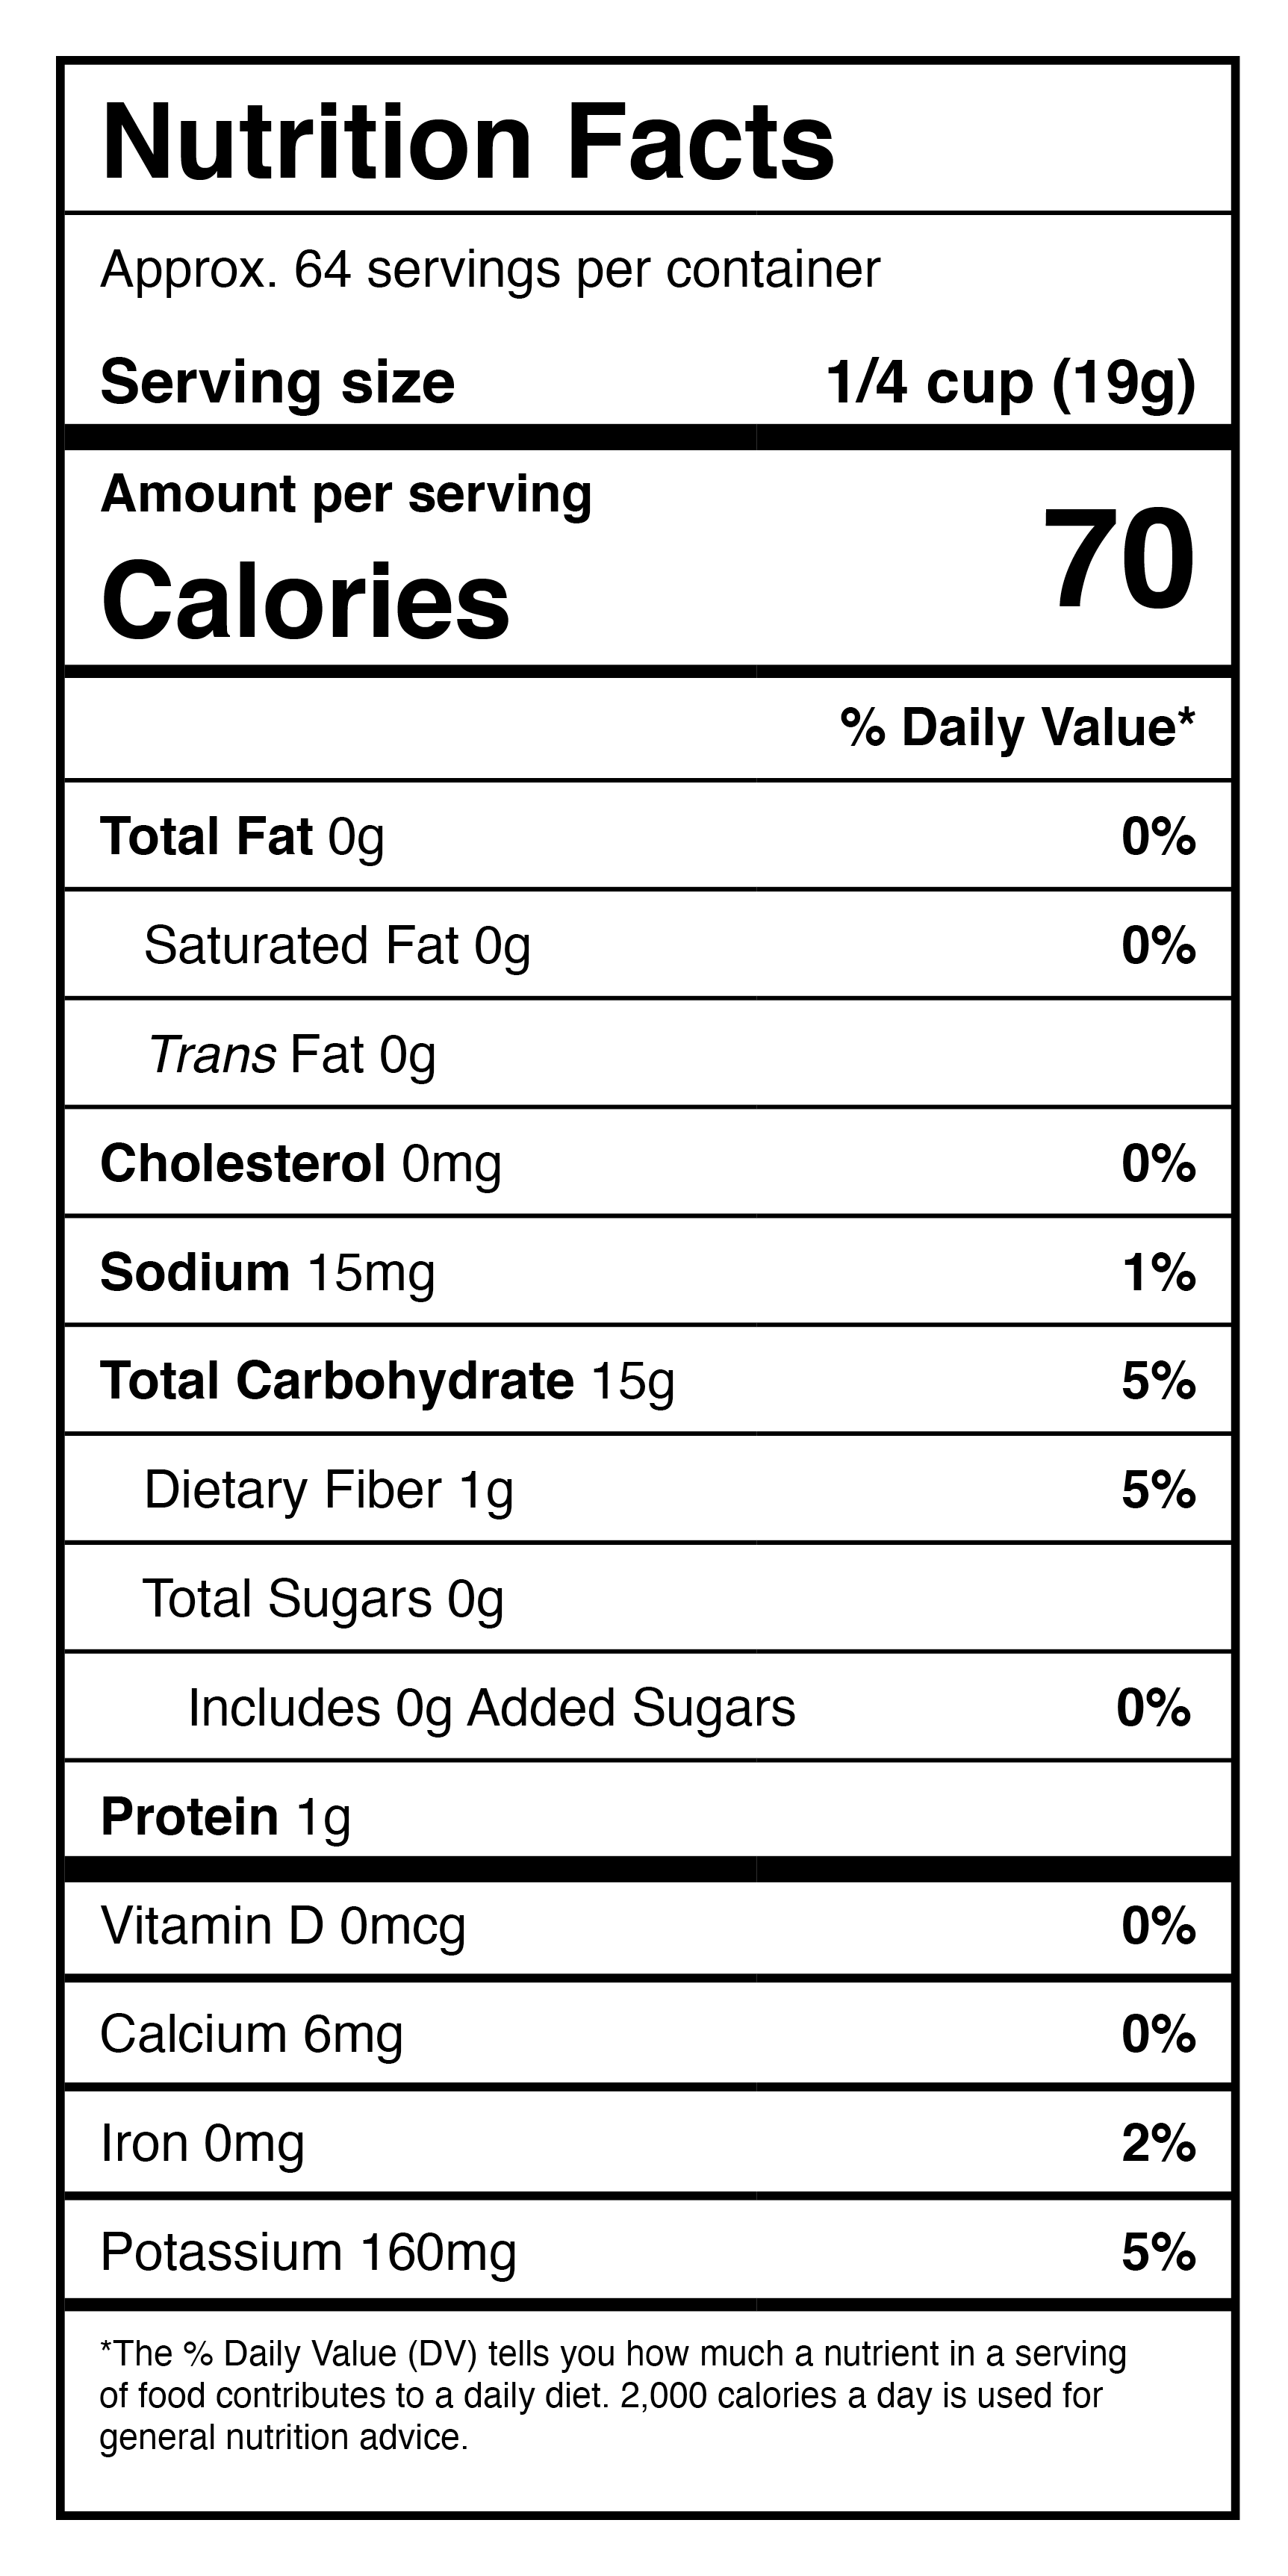 A nutrition label for a protein bar featuring Harmony House Dried Potatoes.